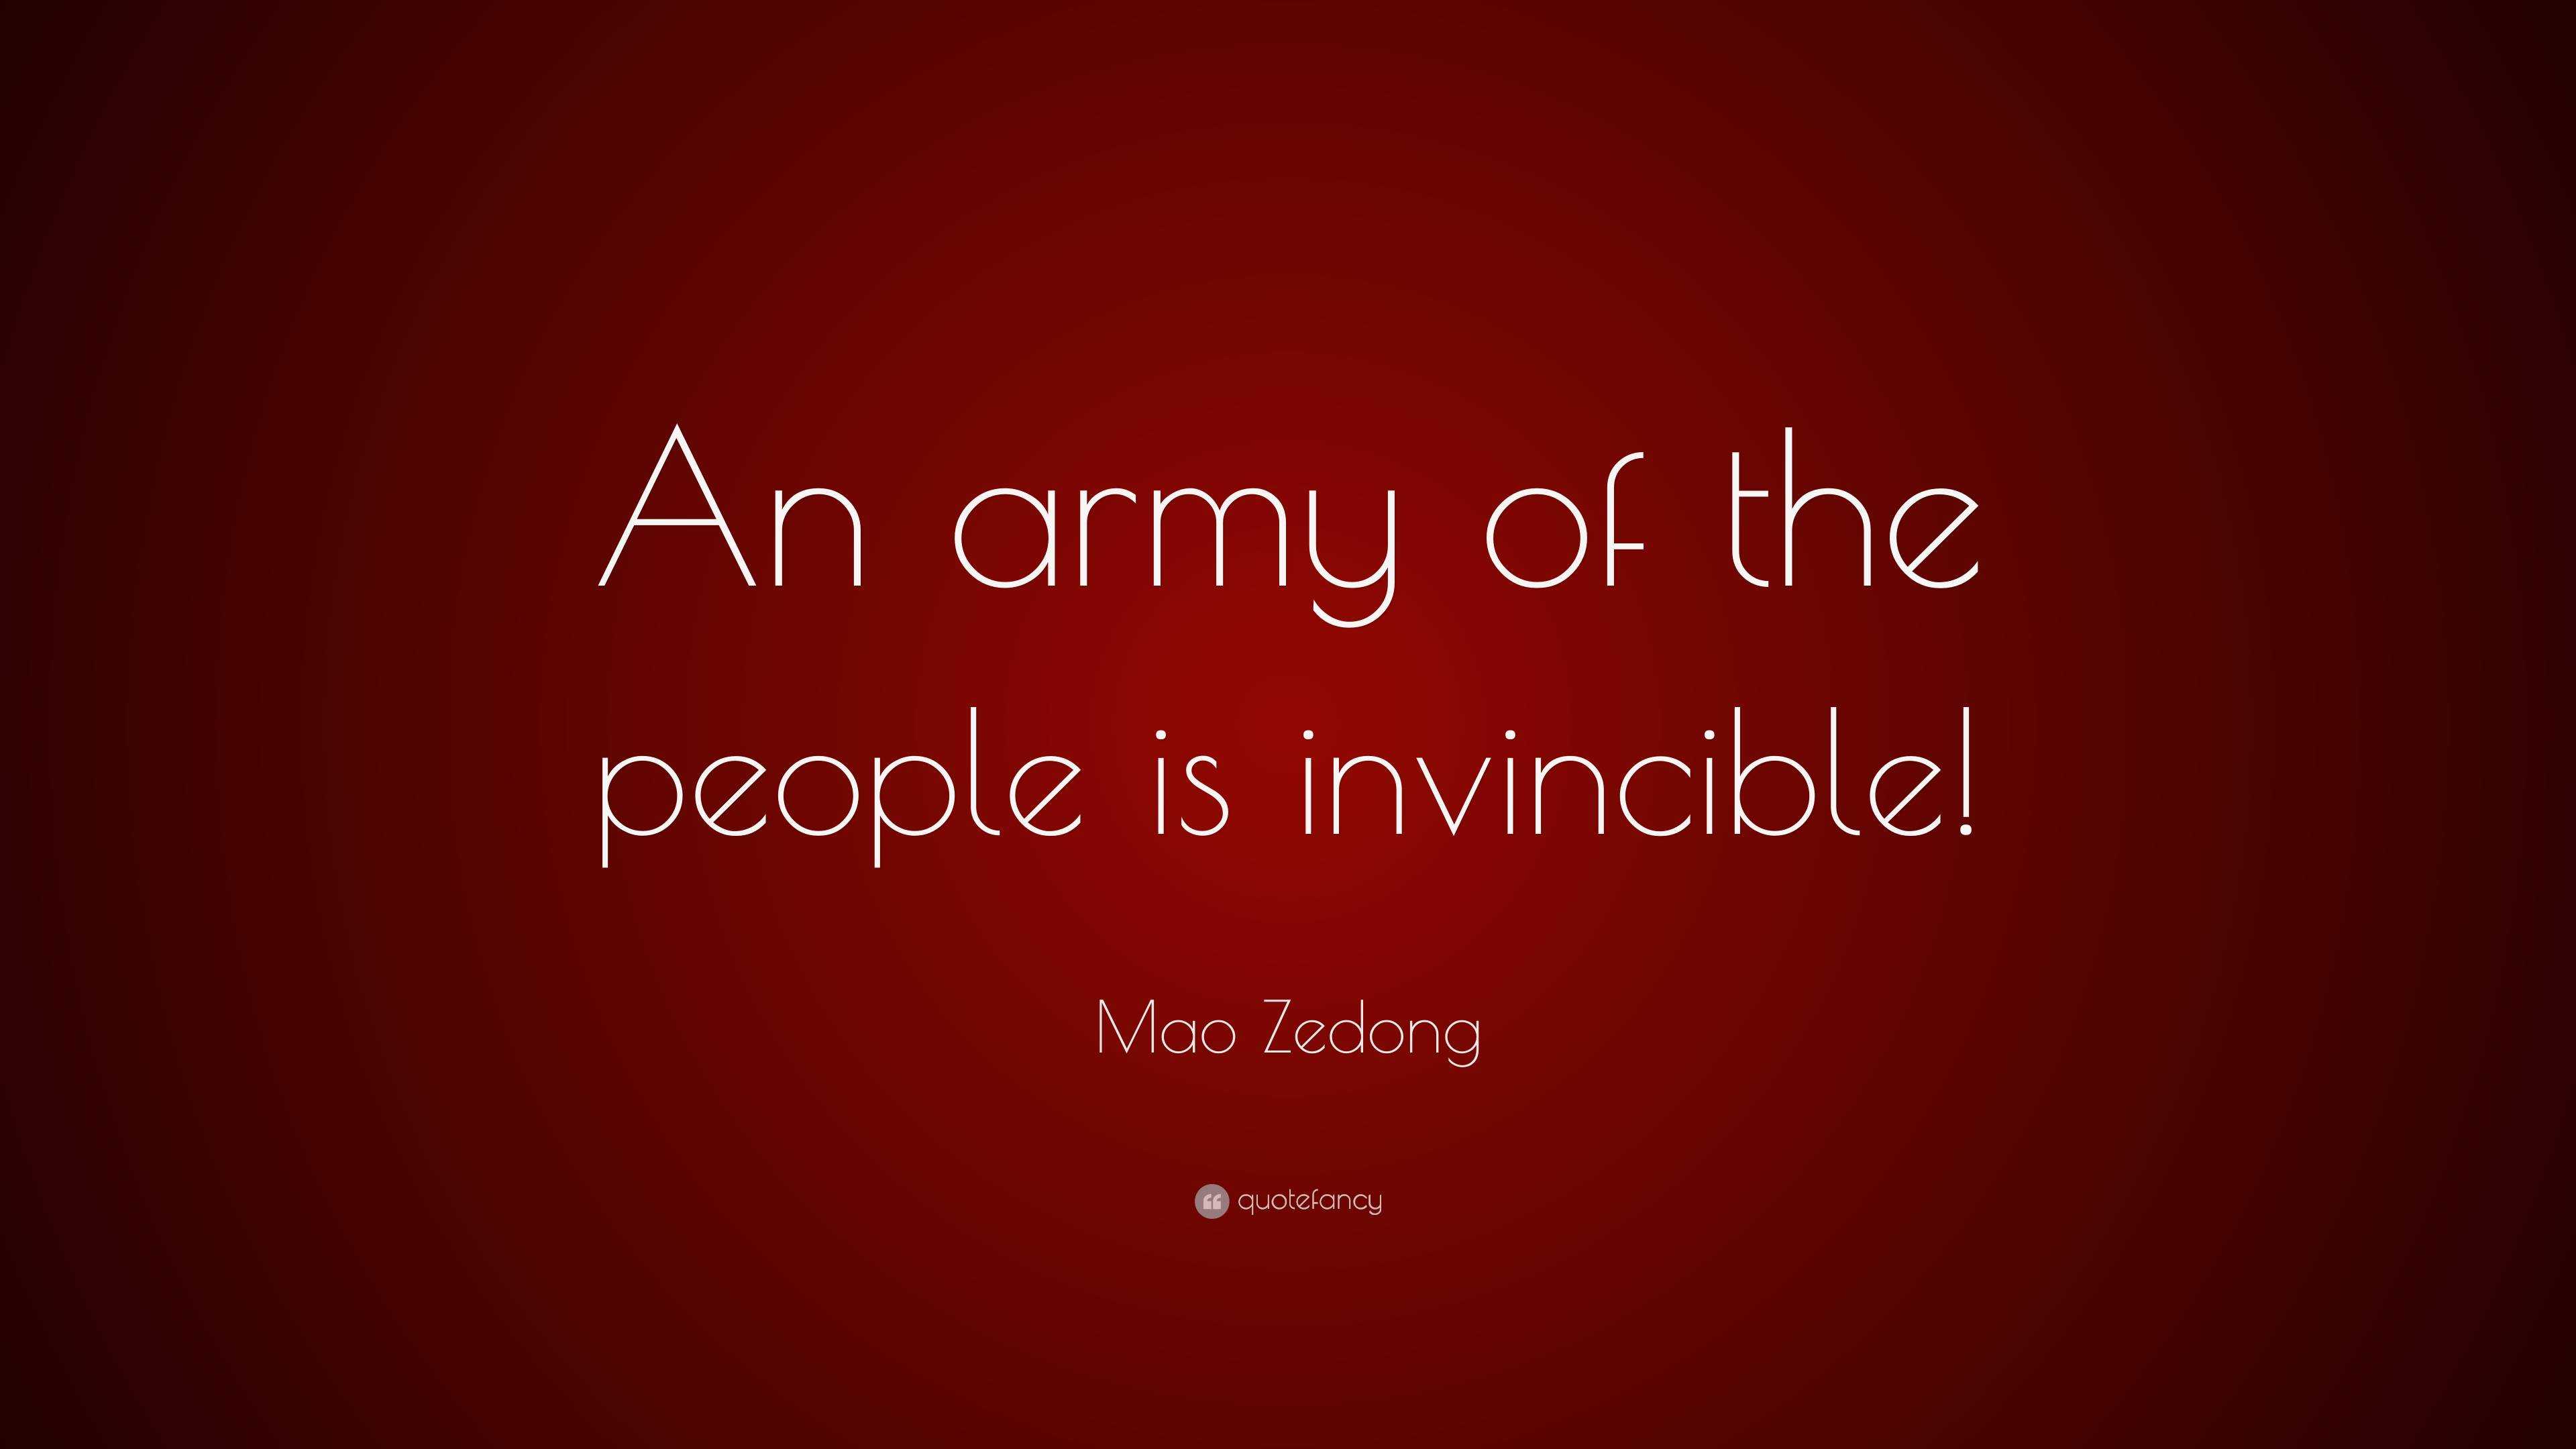 Mao Zedong Quote: “An army of the people is invincible!”